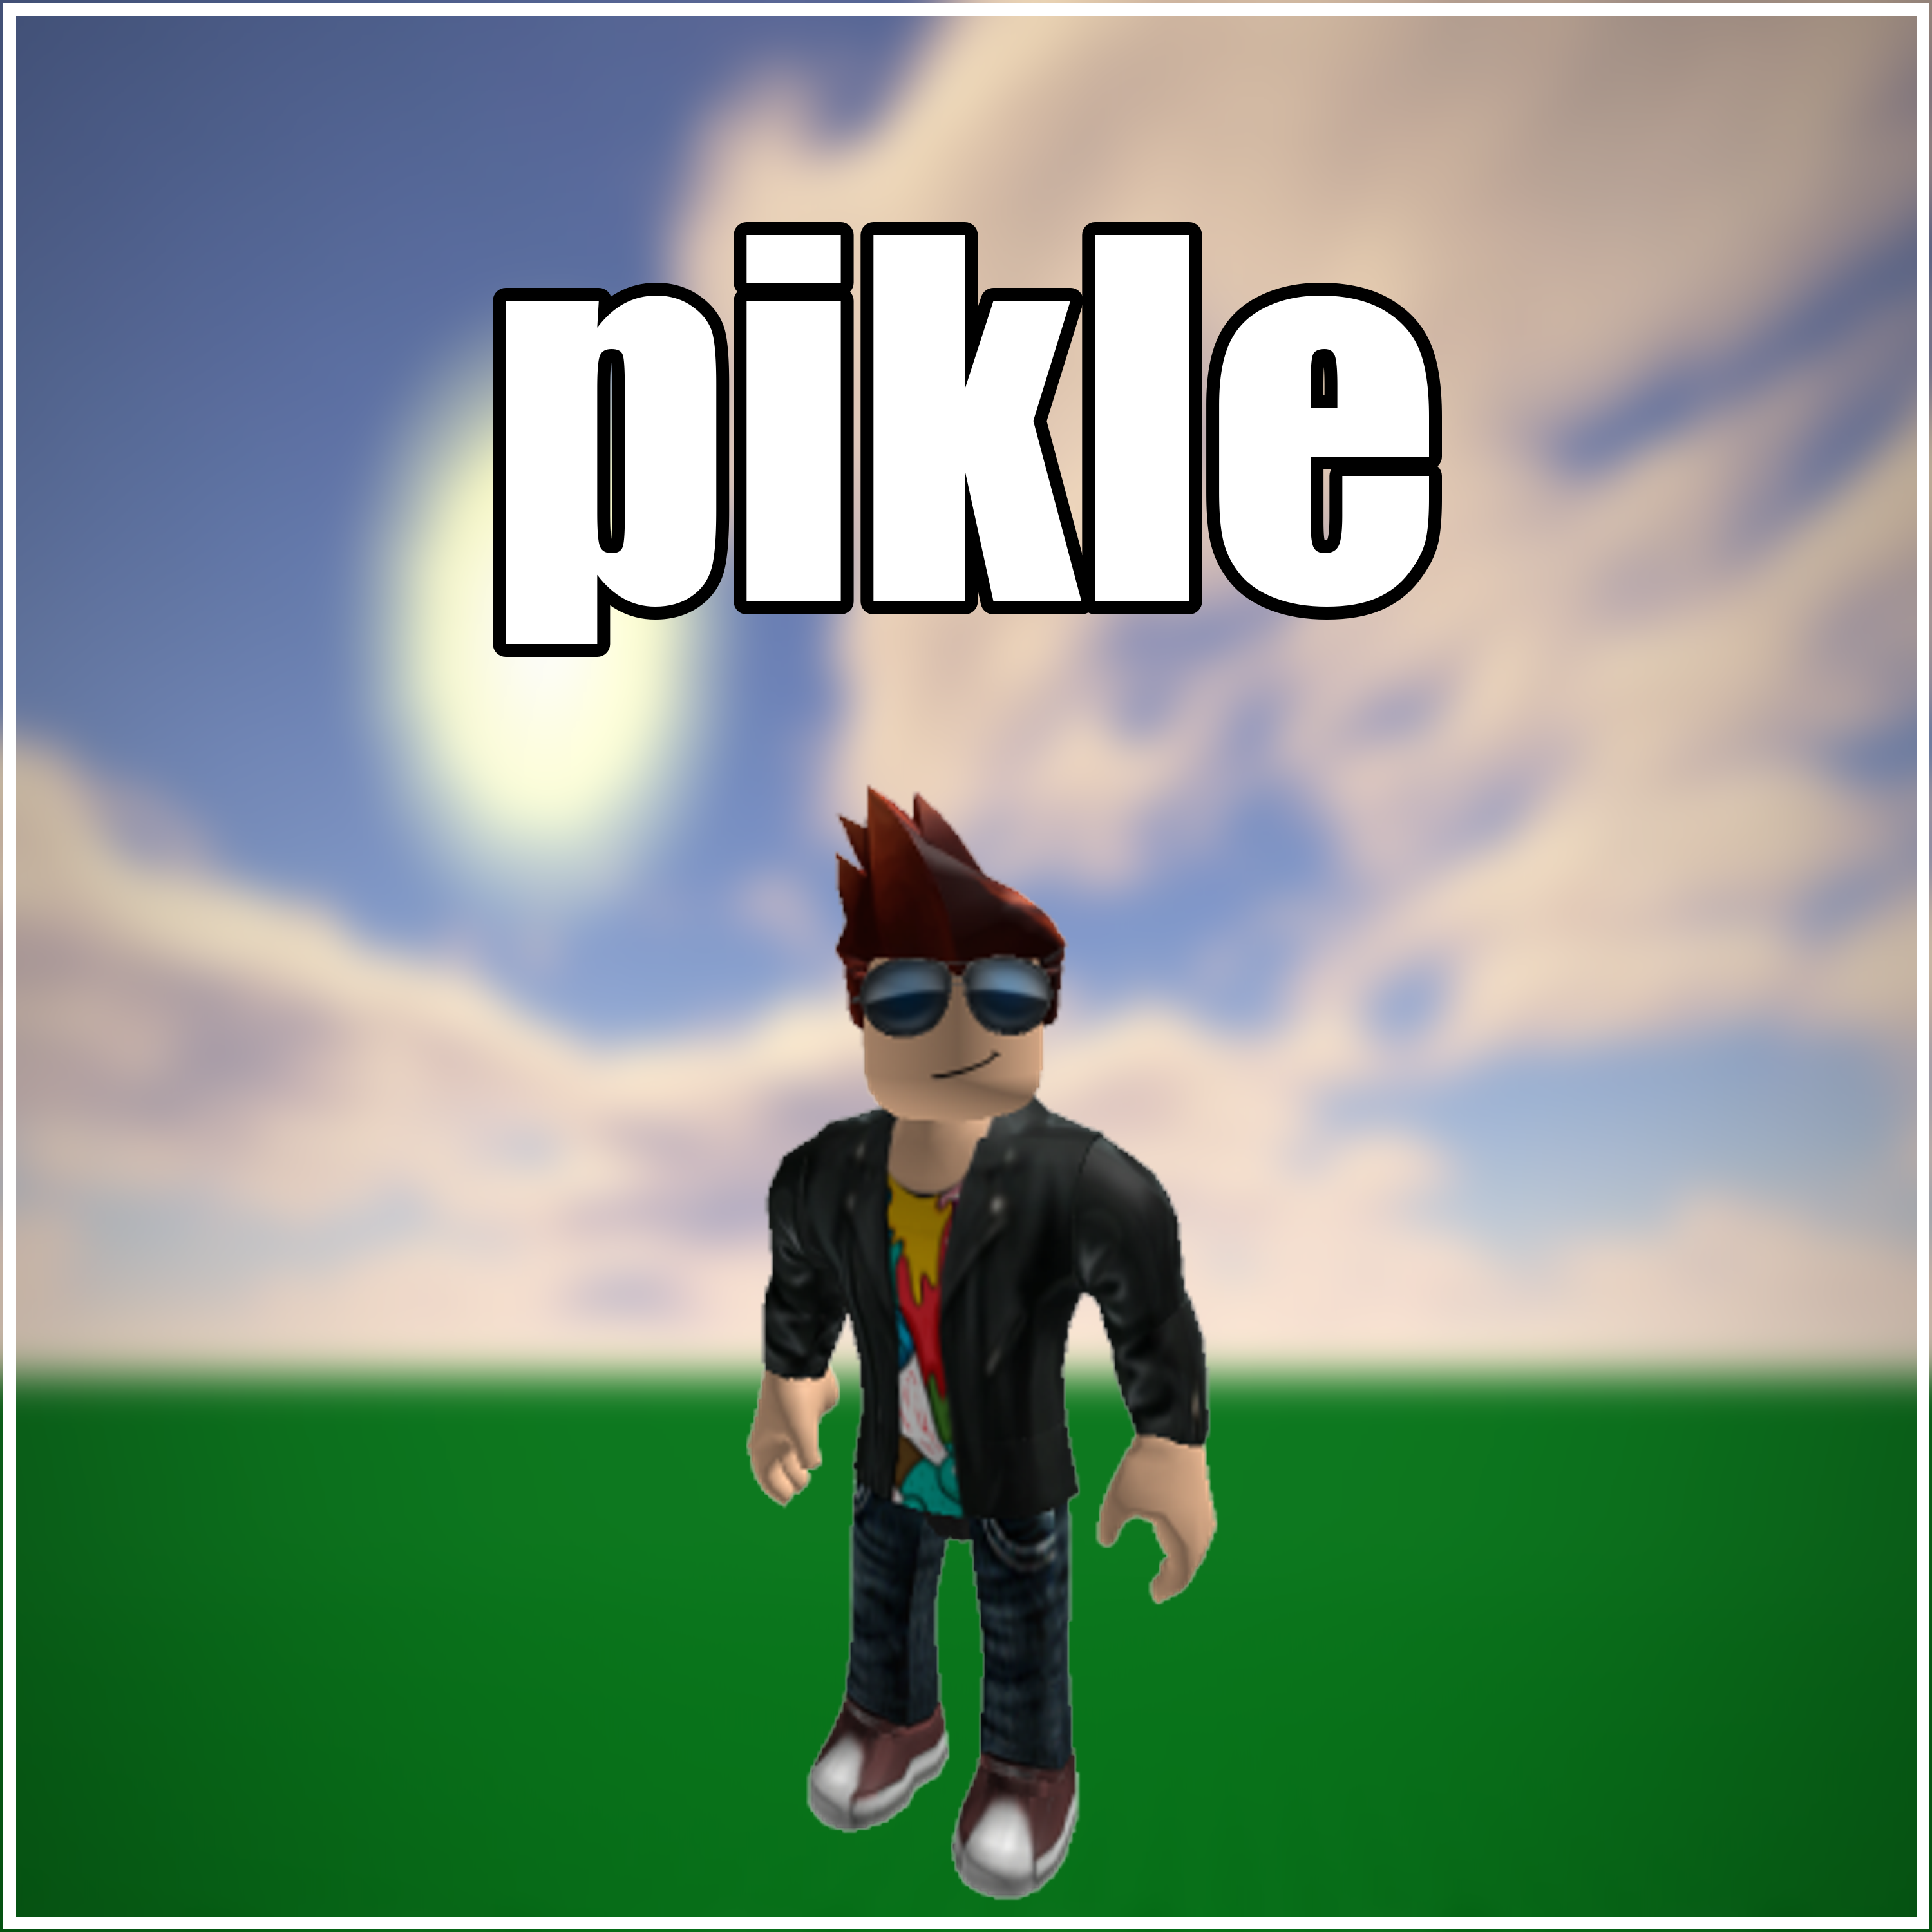 robruh RARE username "pikle" ROBLOX account guaranteed to be unverified!